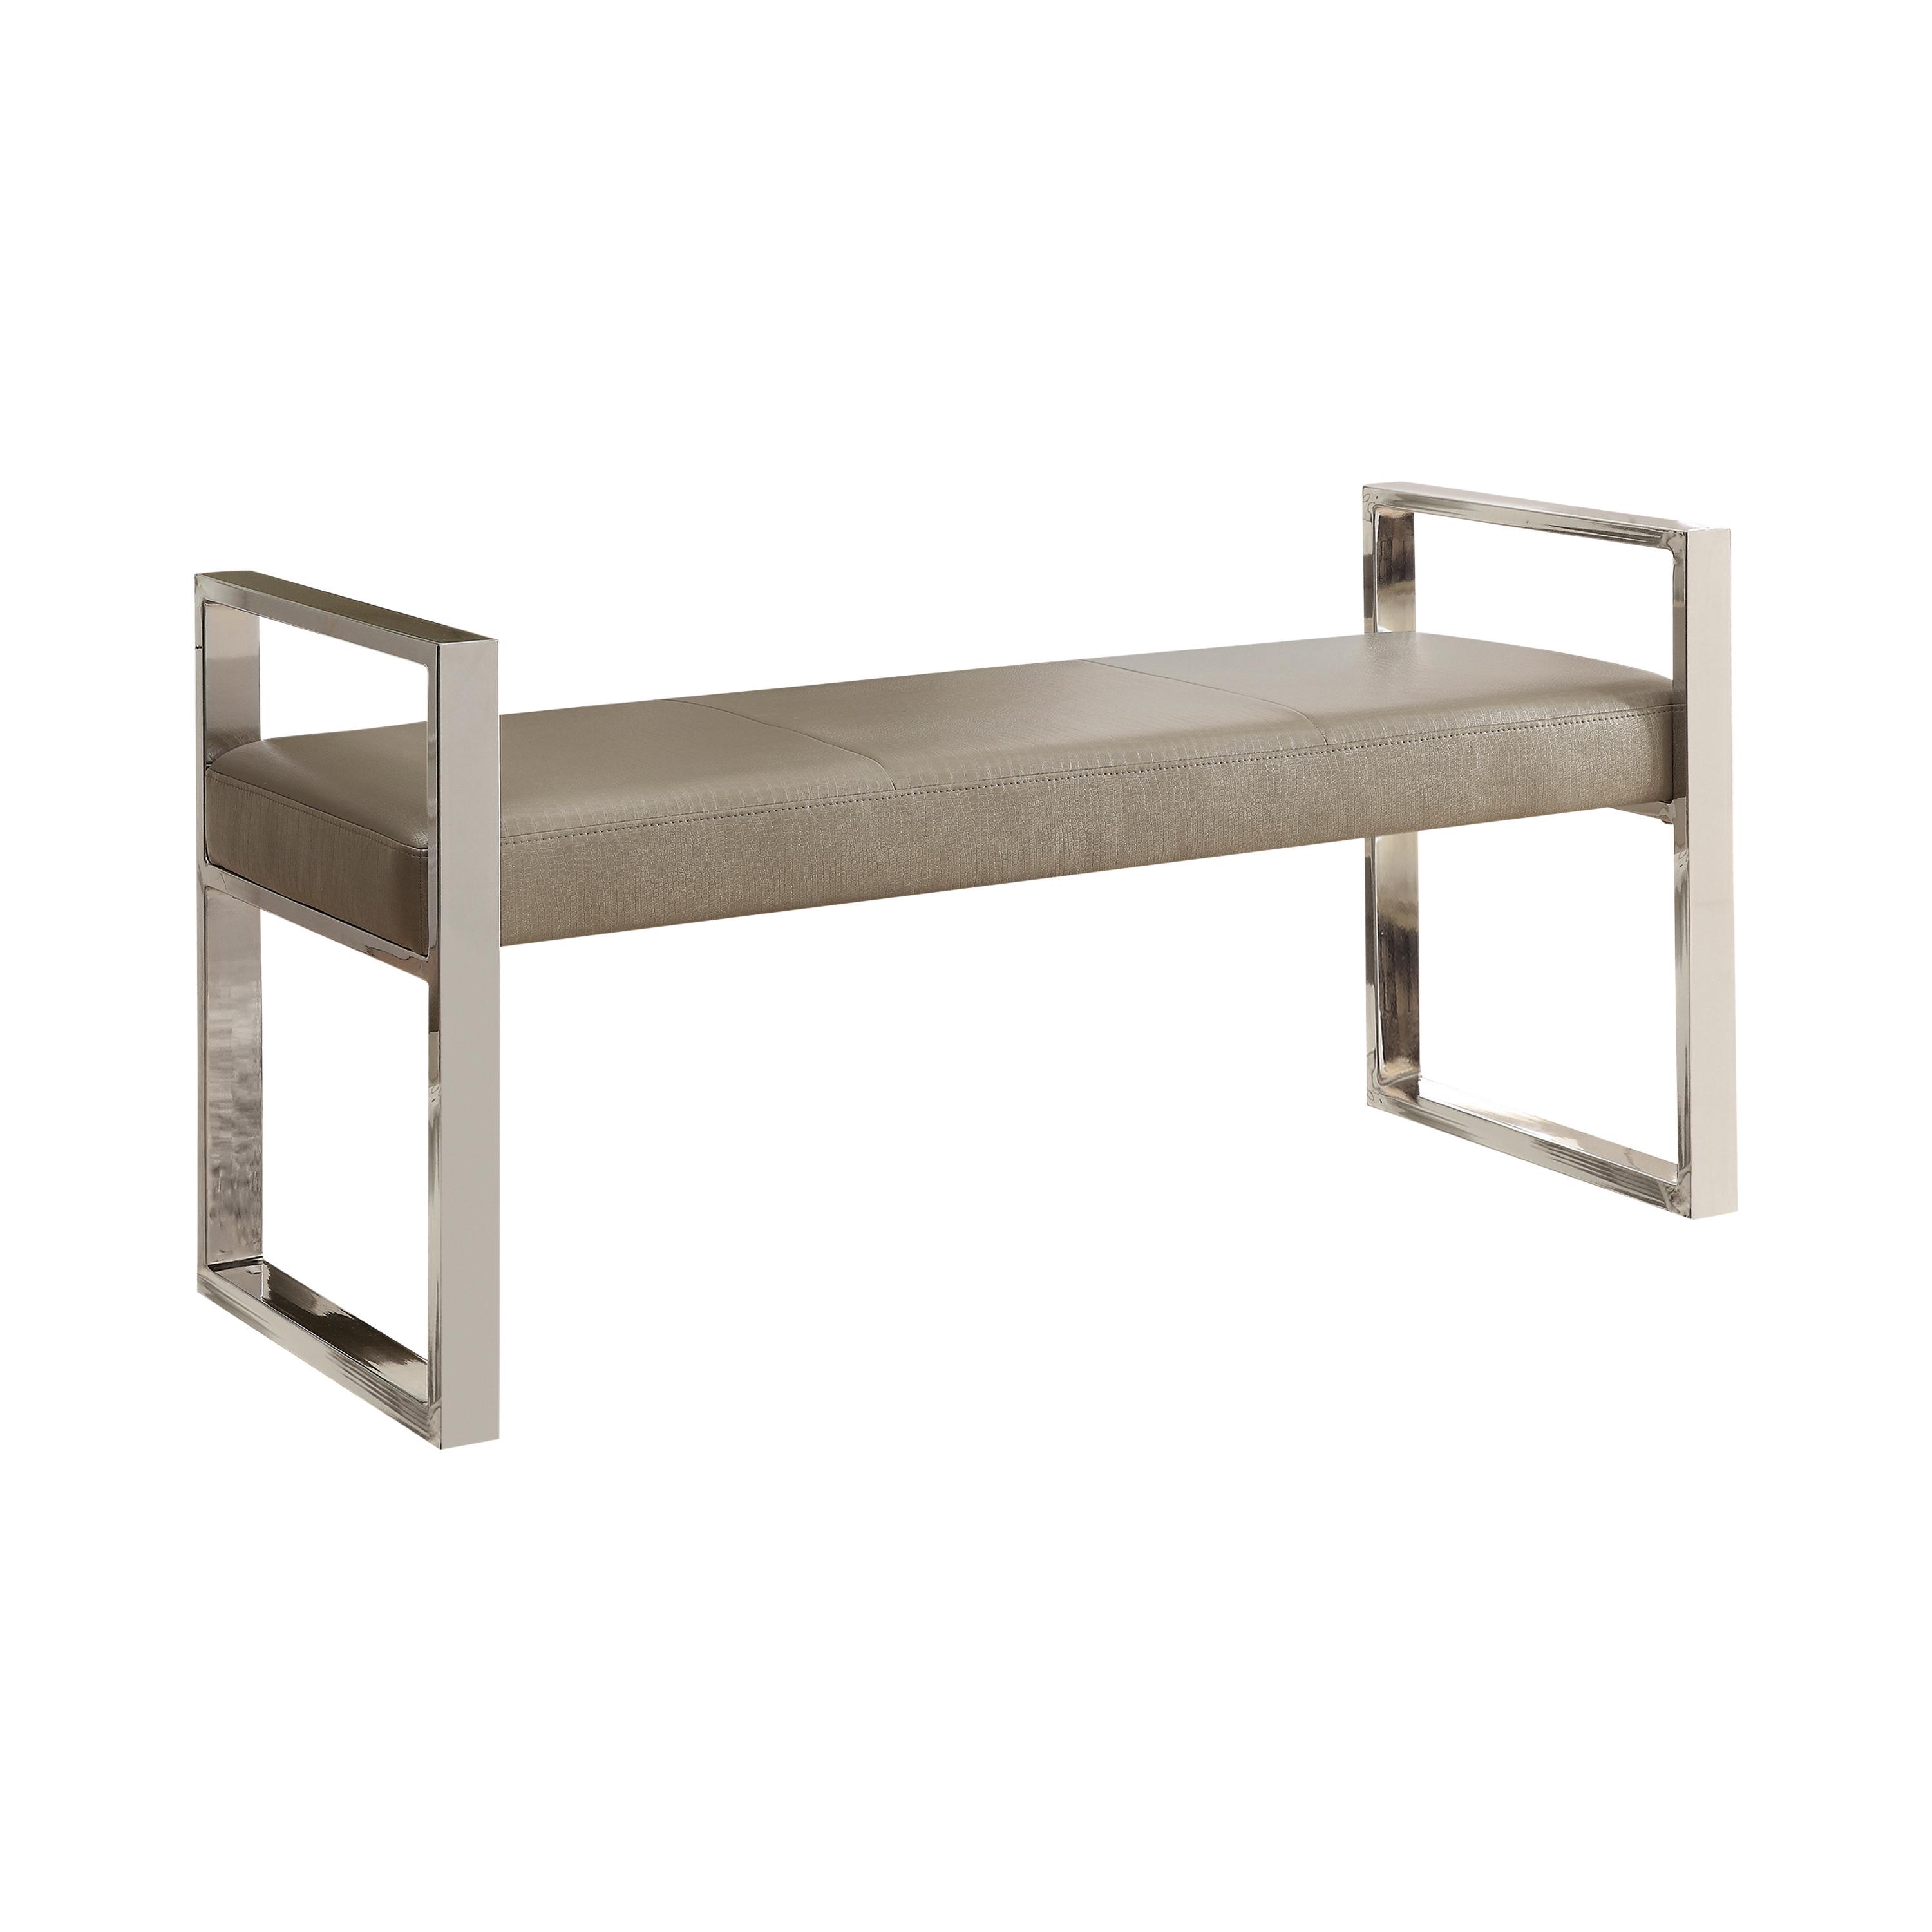 Contemporary Bench 500434 500434 in Champagne Leatherette